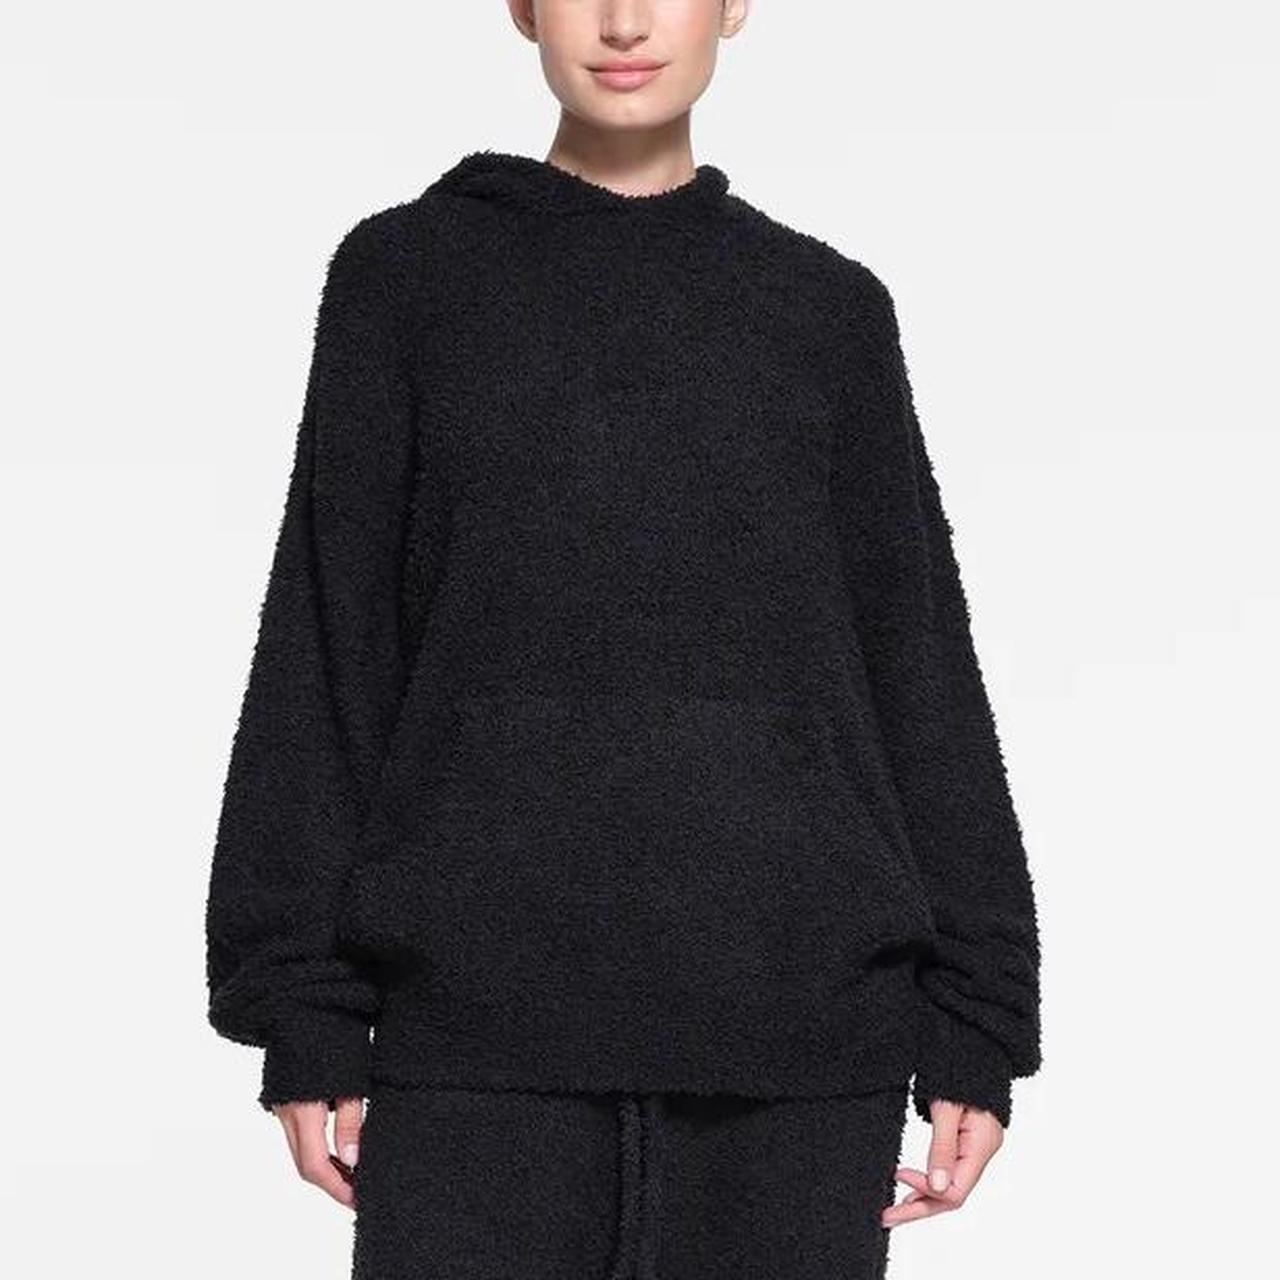 SKIMS - SKIMS' Cozy Knit Pullover: the perfect oversized